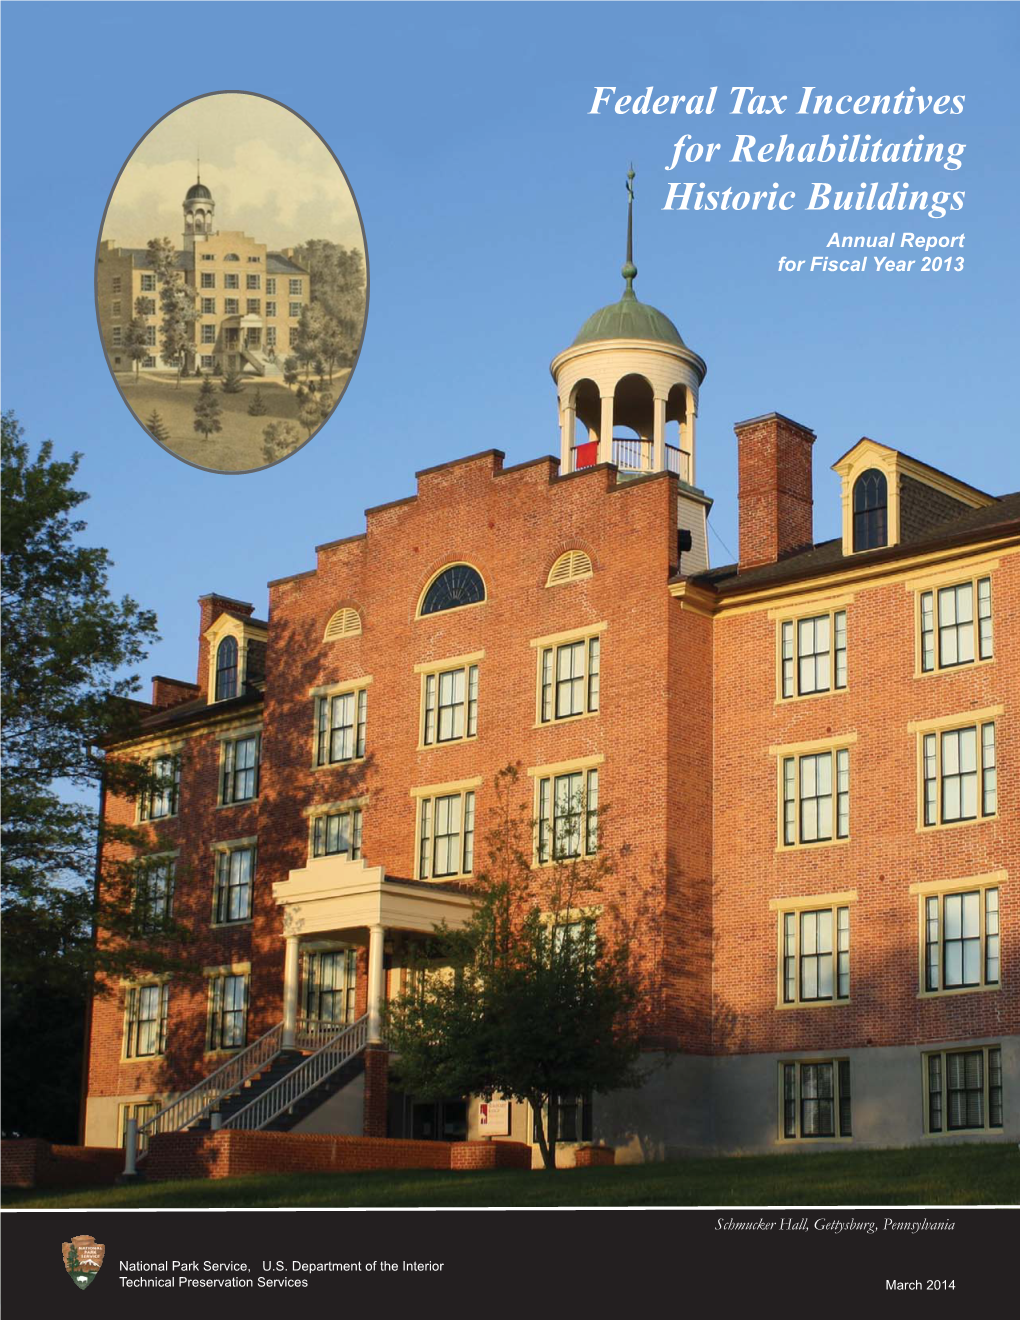 Federal Tax Incentives for Rehabilitating Historic Buildings Annual Report for Fiscal Year 2013